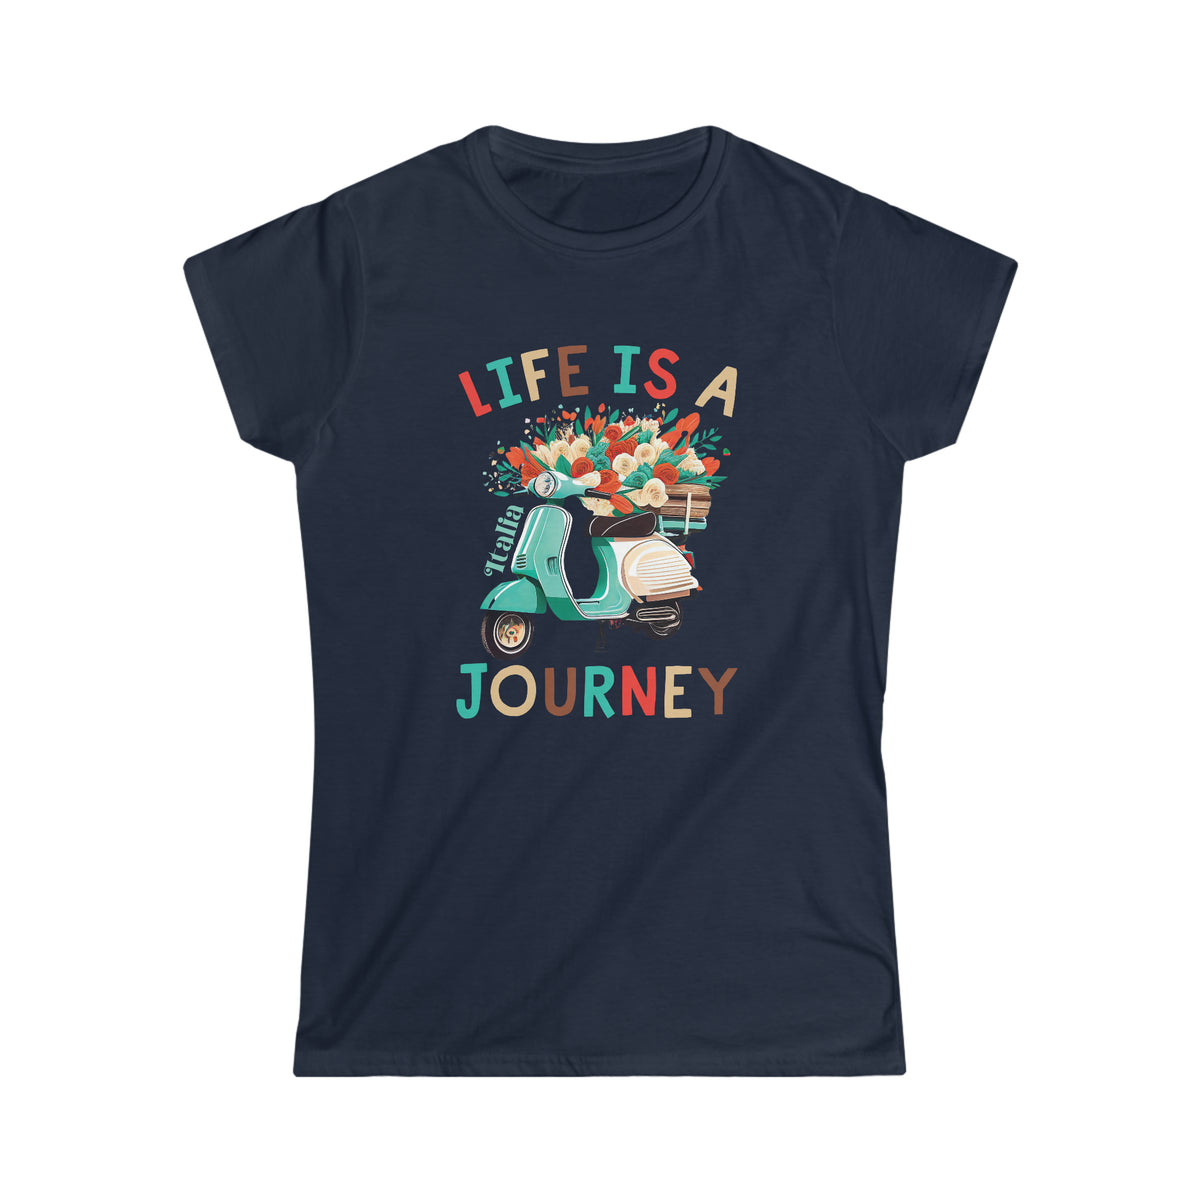 Life Is A Journey Italy Shirt | Italy Travel Gifts | Italy Vacation Shirt | Gift For Her | Women's Slim Fit Soft Style T-shirt